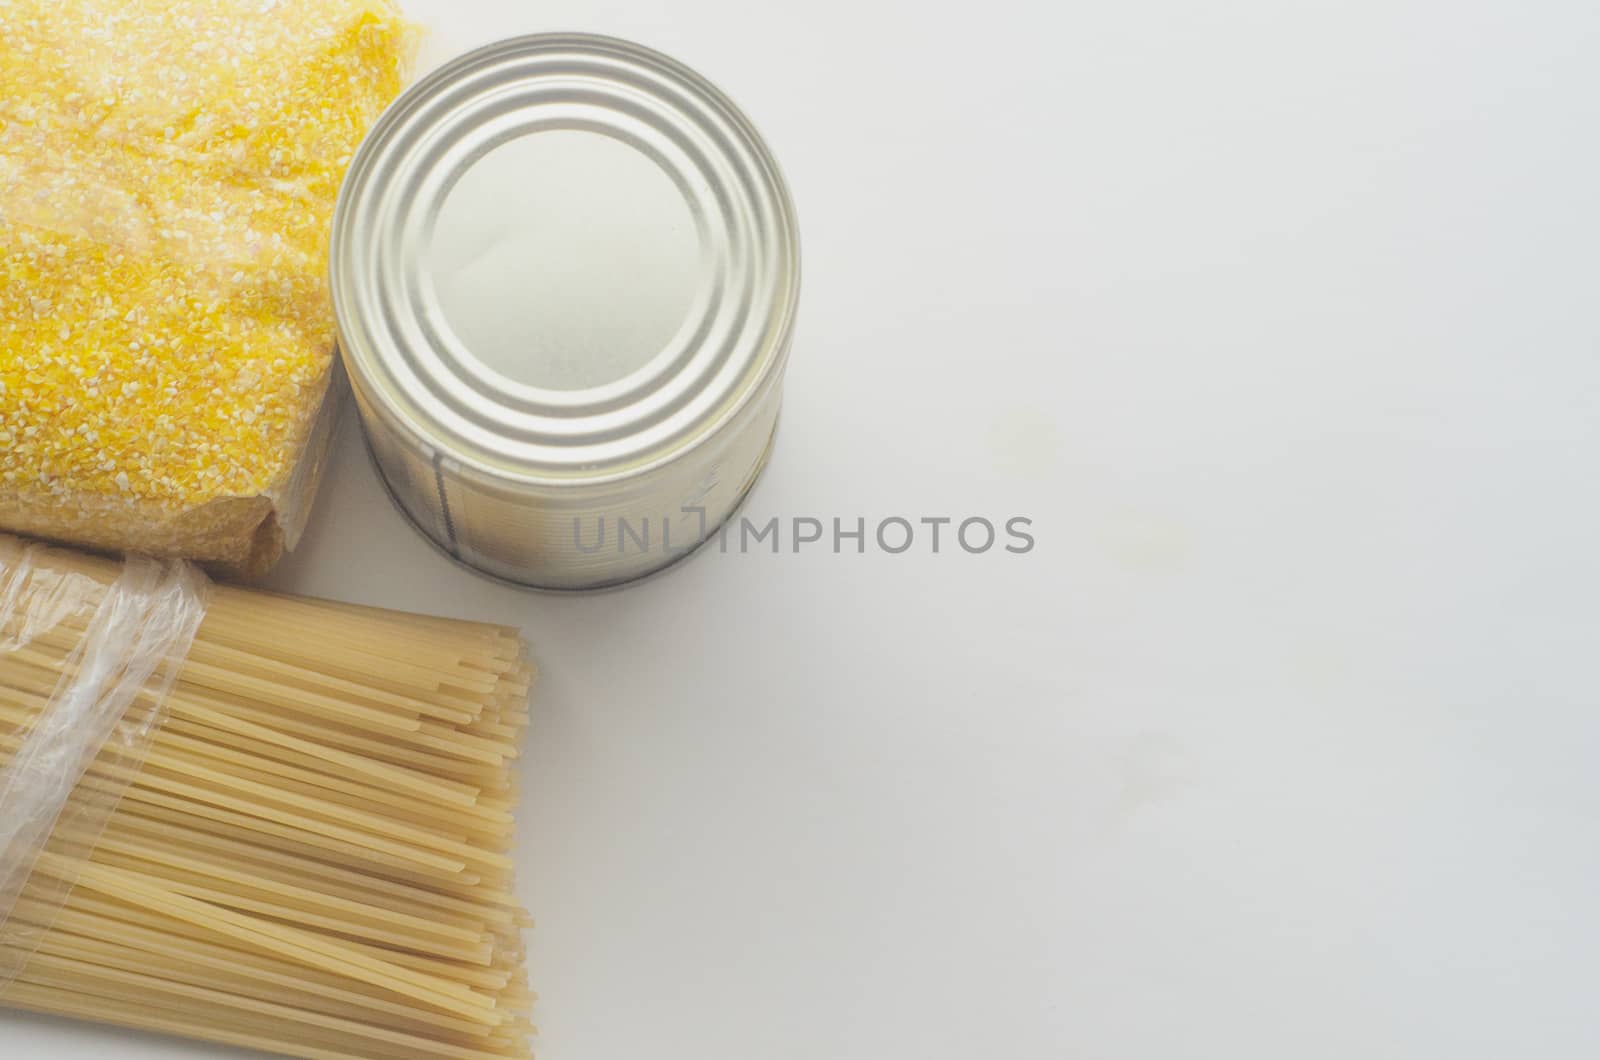 Food supplies, crisis food stock for quarantine isolation period on white background. Pasta, corn grits and canned food. Food delivery, coronavirus quarantine. Copyspace.